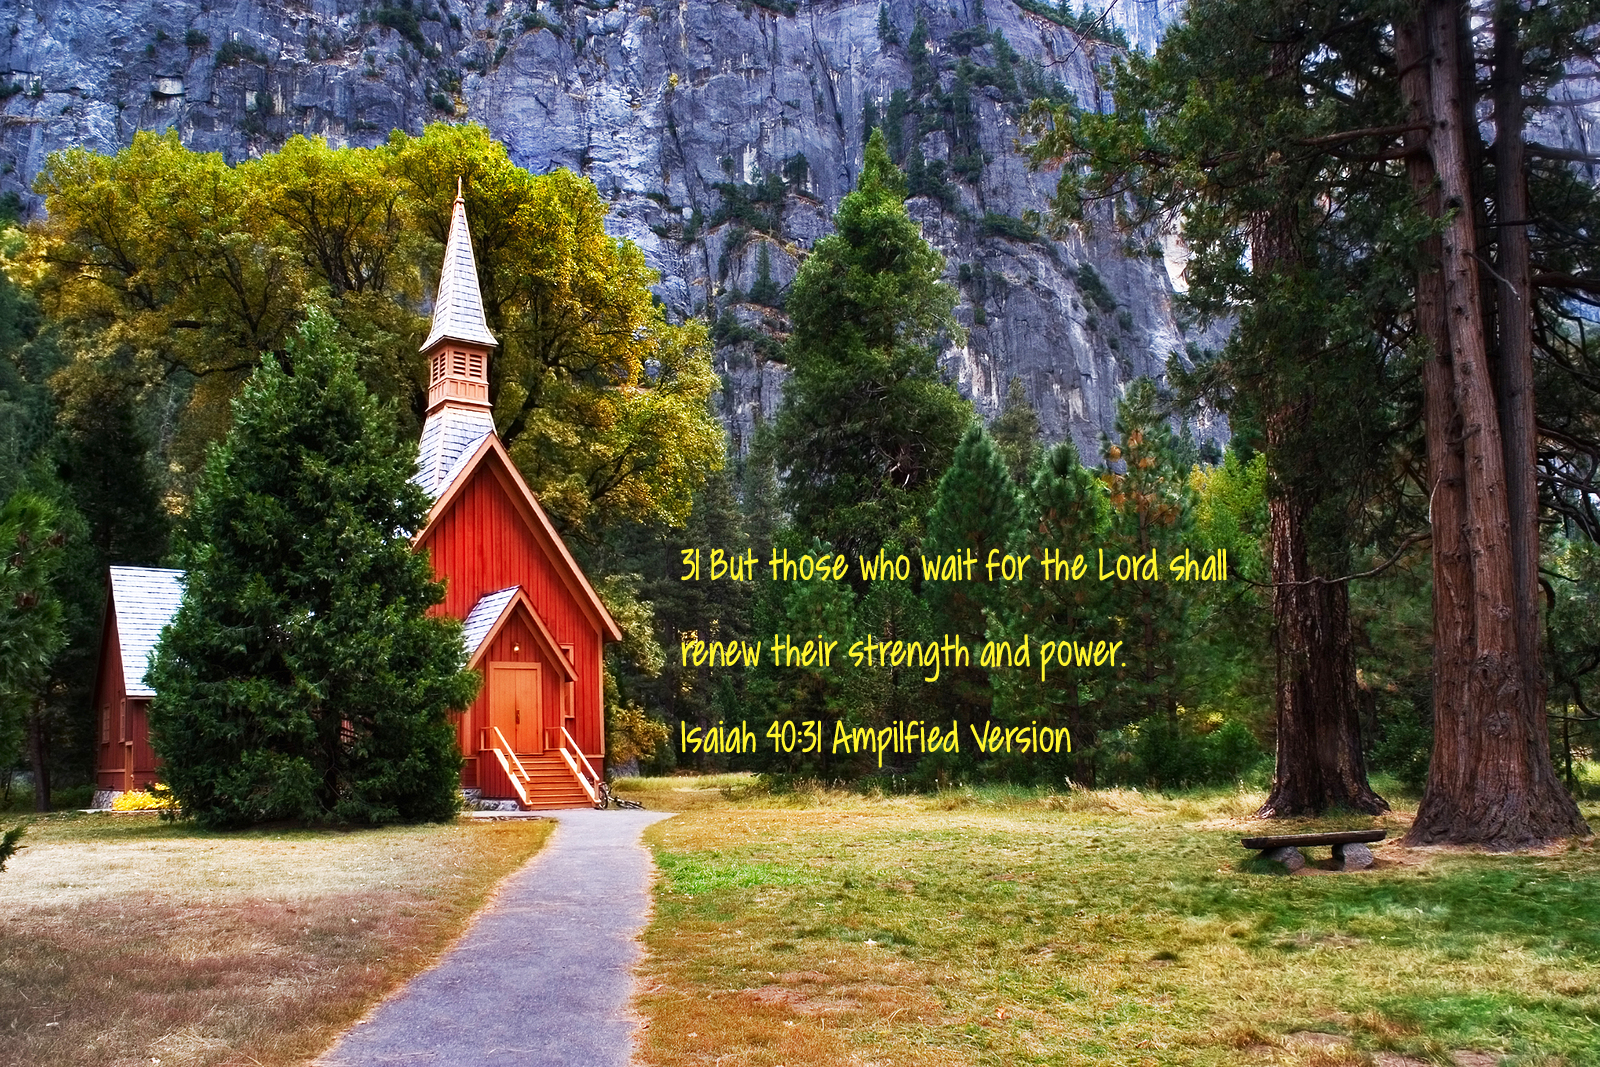 Those that wait on the Lord shall renew their strength & power